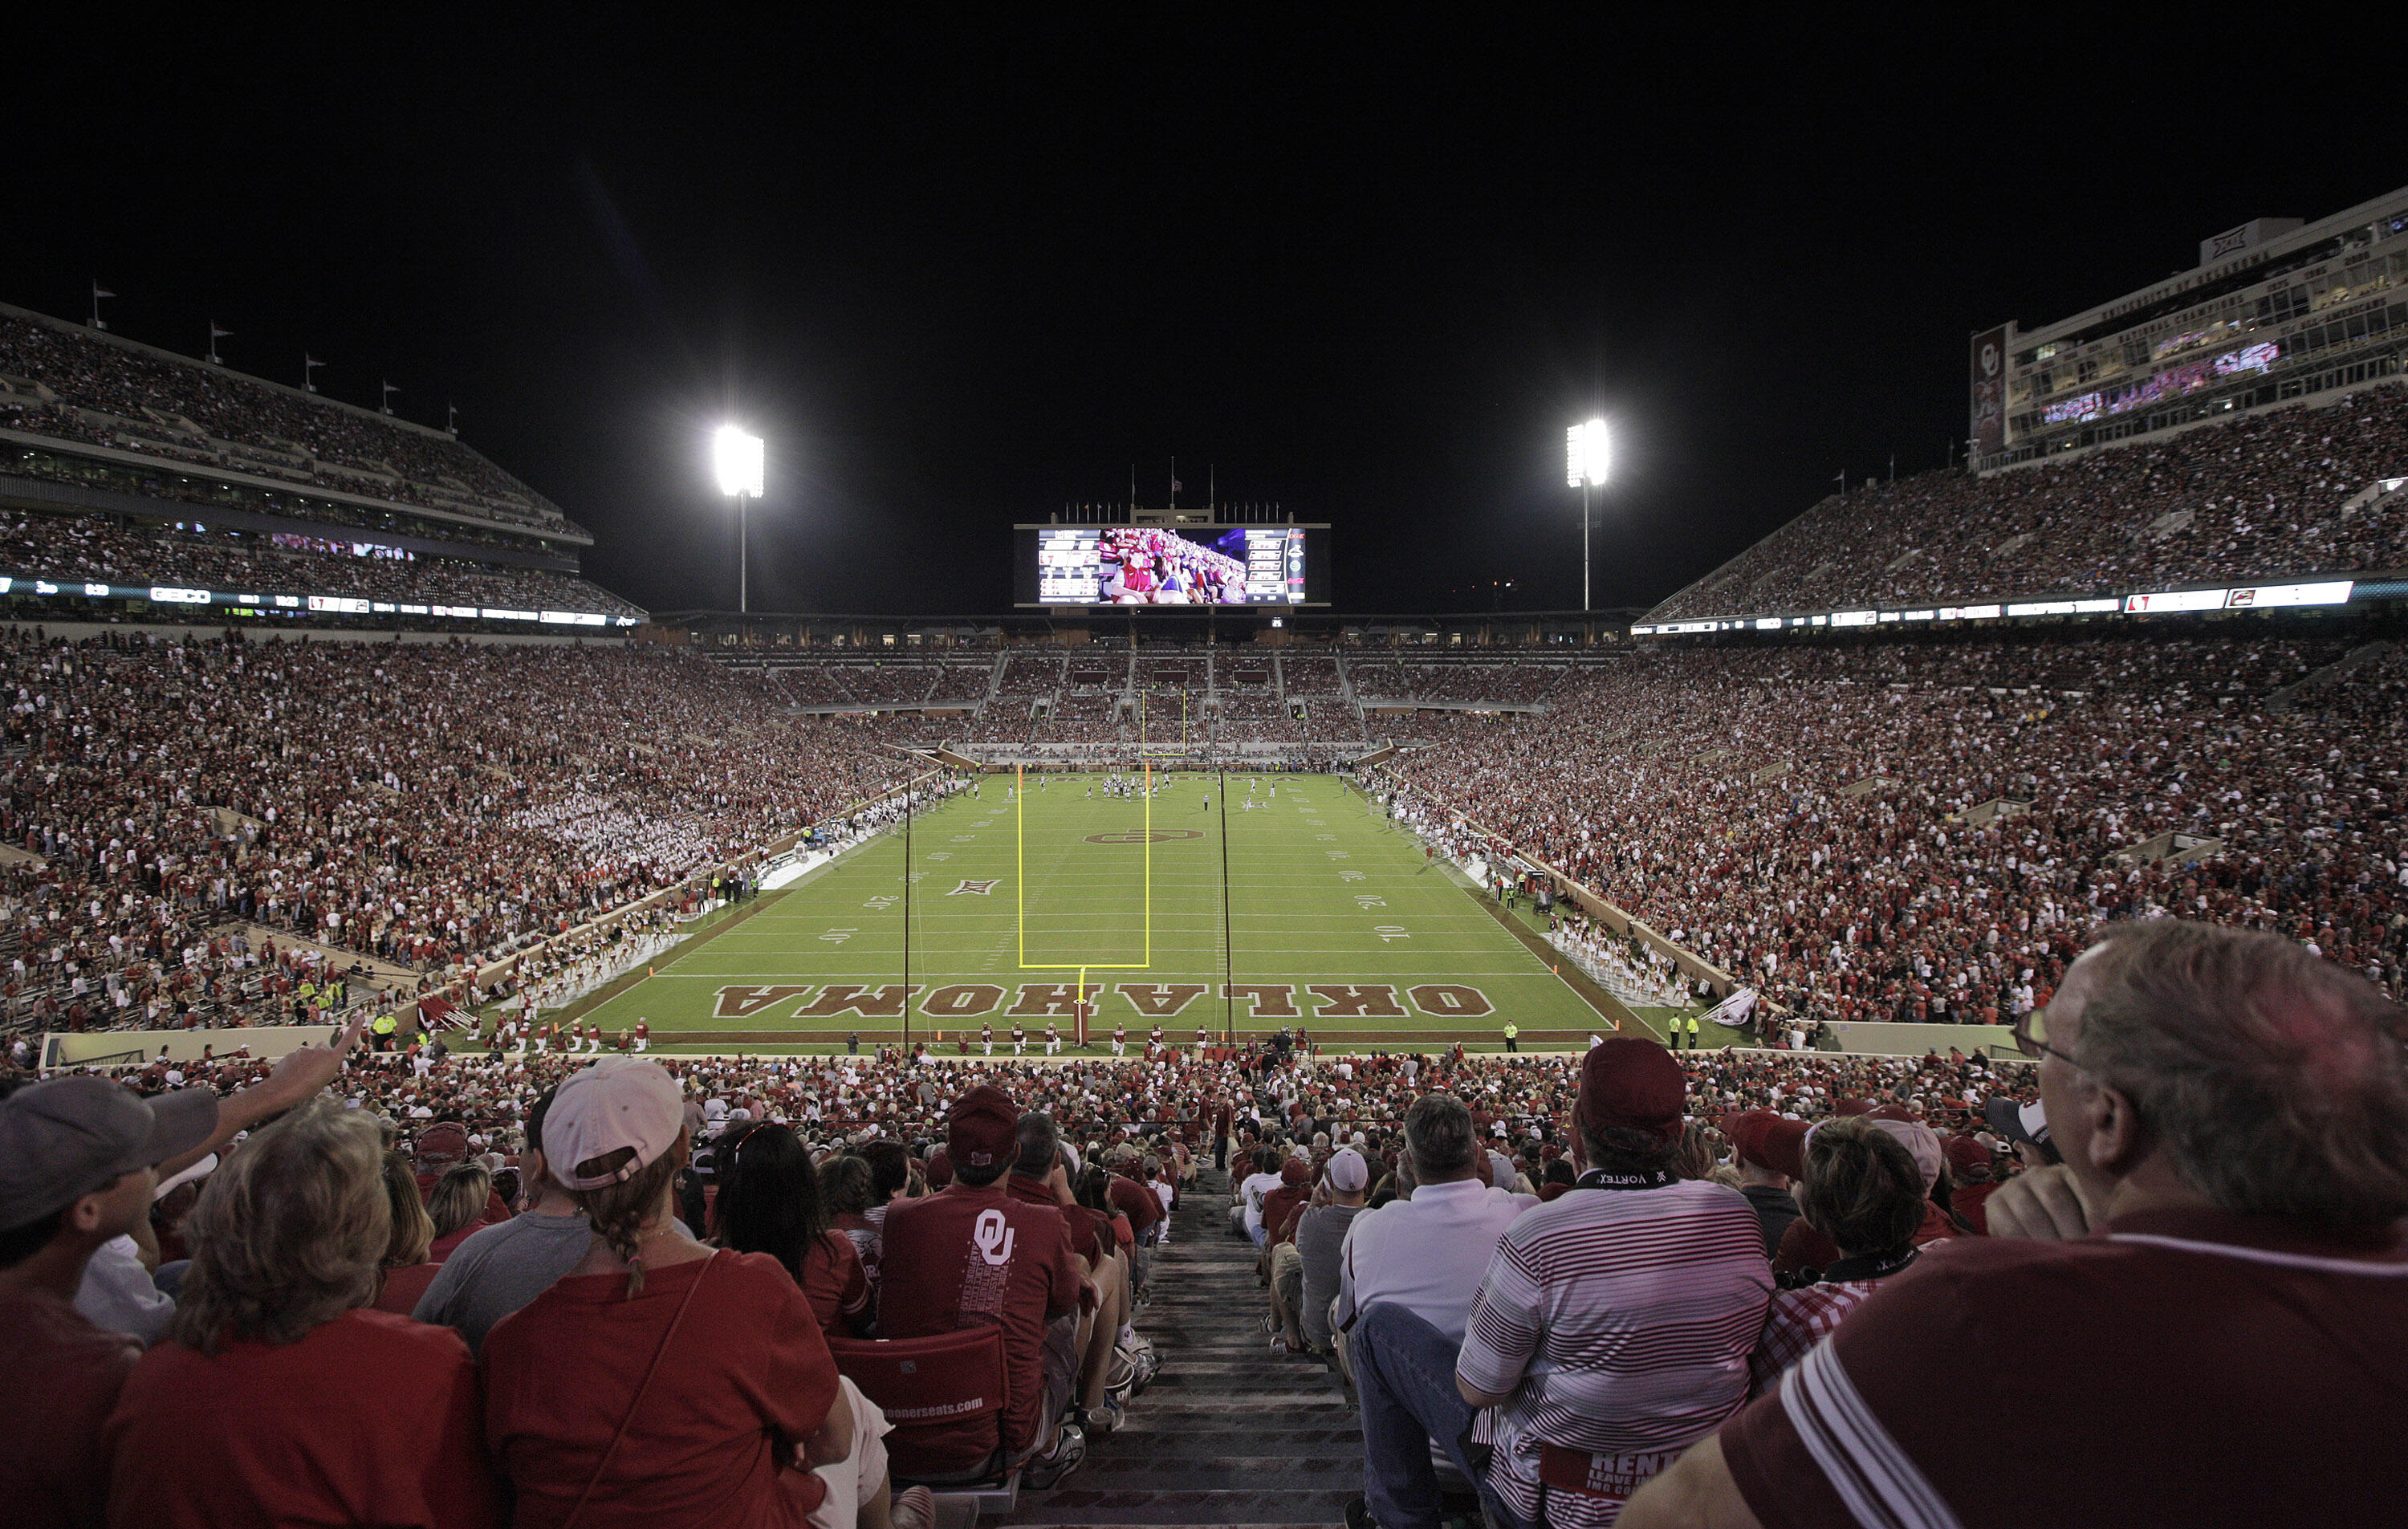 NORMAN, OK - SEPTEMBER 10 : A general view of the stadium during the game against the Louisiana Monroe Warhawks September 10, 2016 at Gaylord Family Memorial Stadium in Norman, Oklahoma. The Sooners defeated the Warhawks 59-17. (Photo by Brett Deering/Get